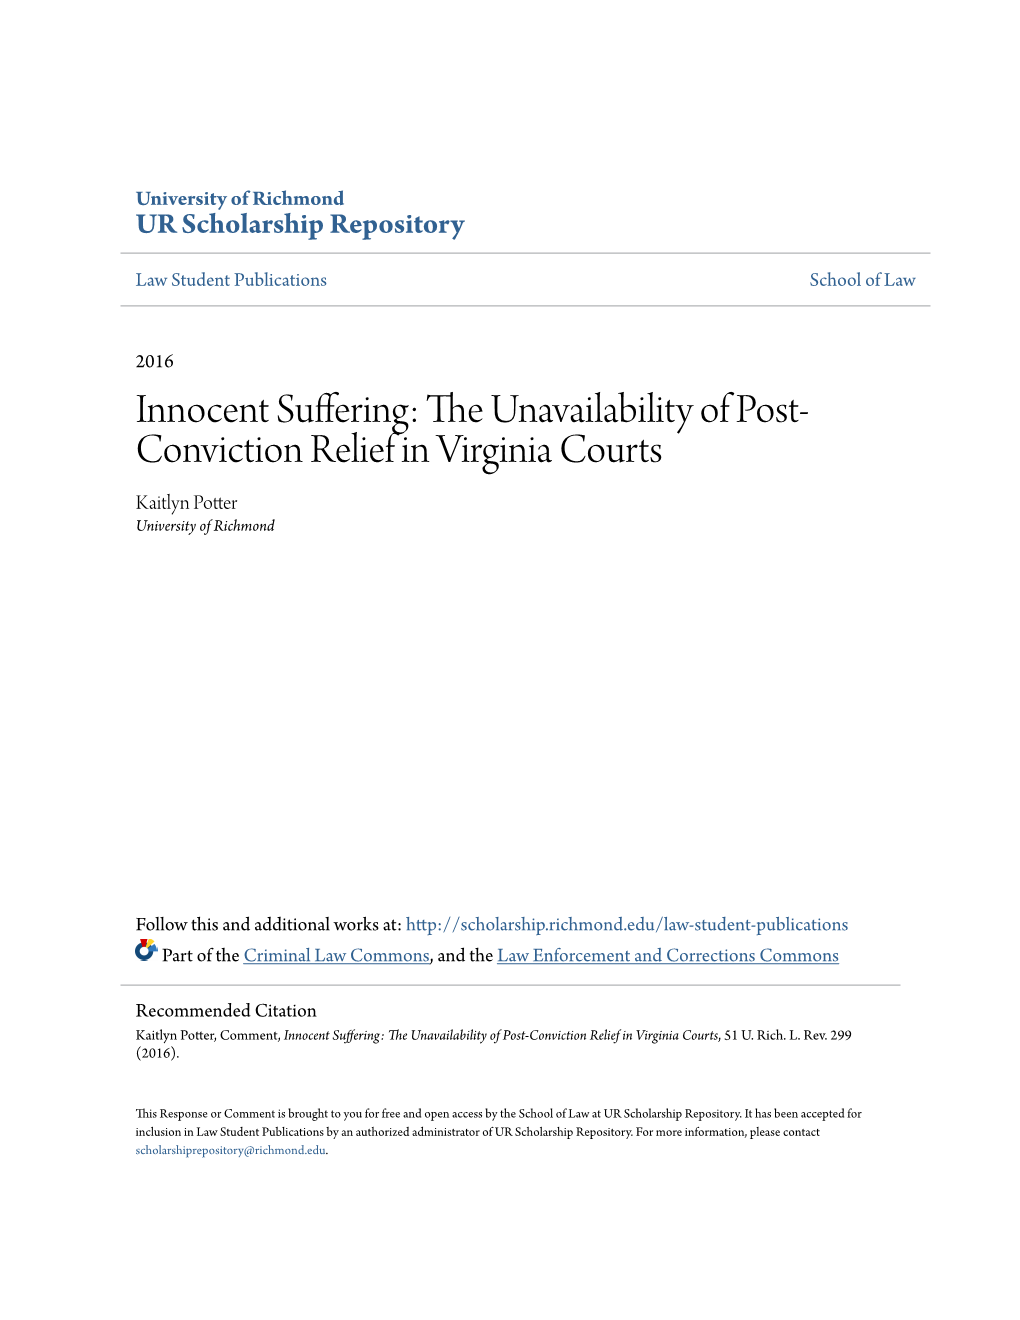 The Unavailability of Post-Conviction Relief in Virginia Courts, 51 U